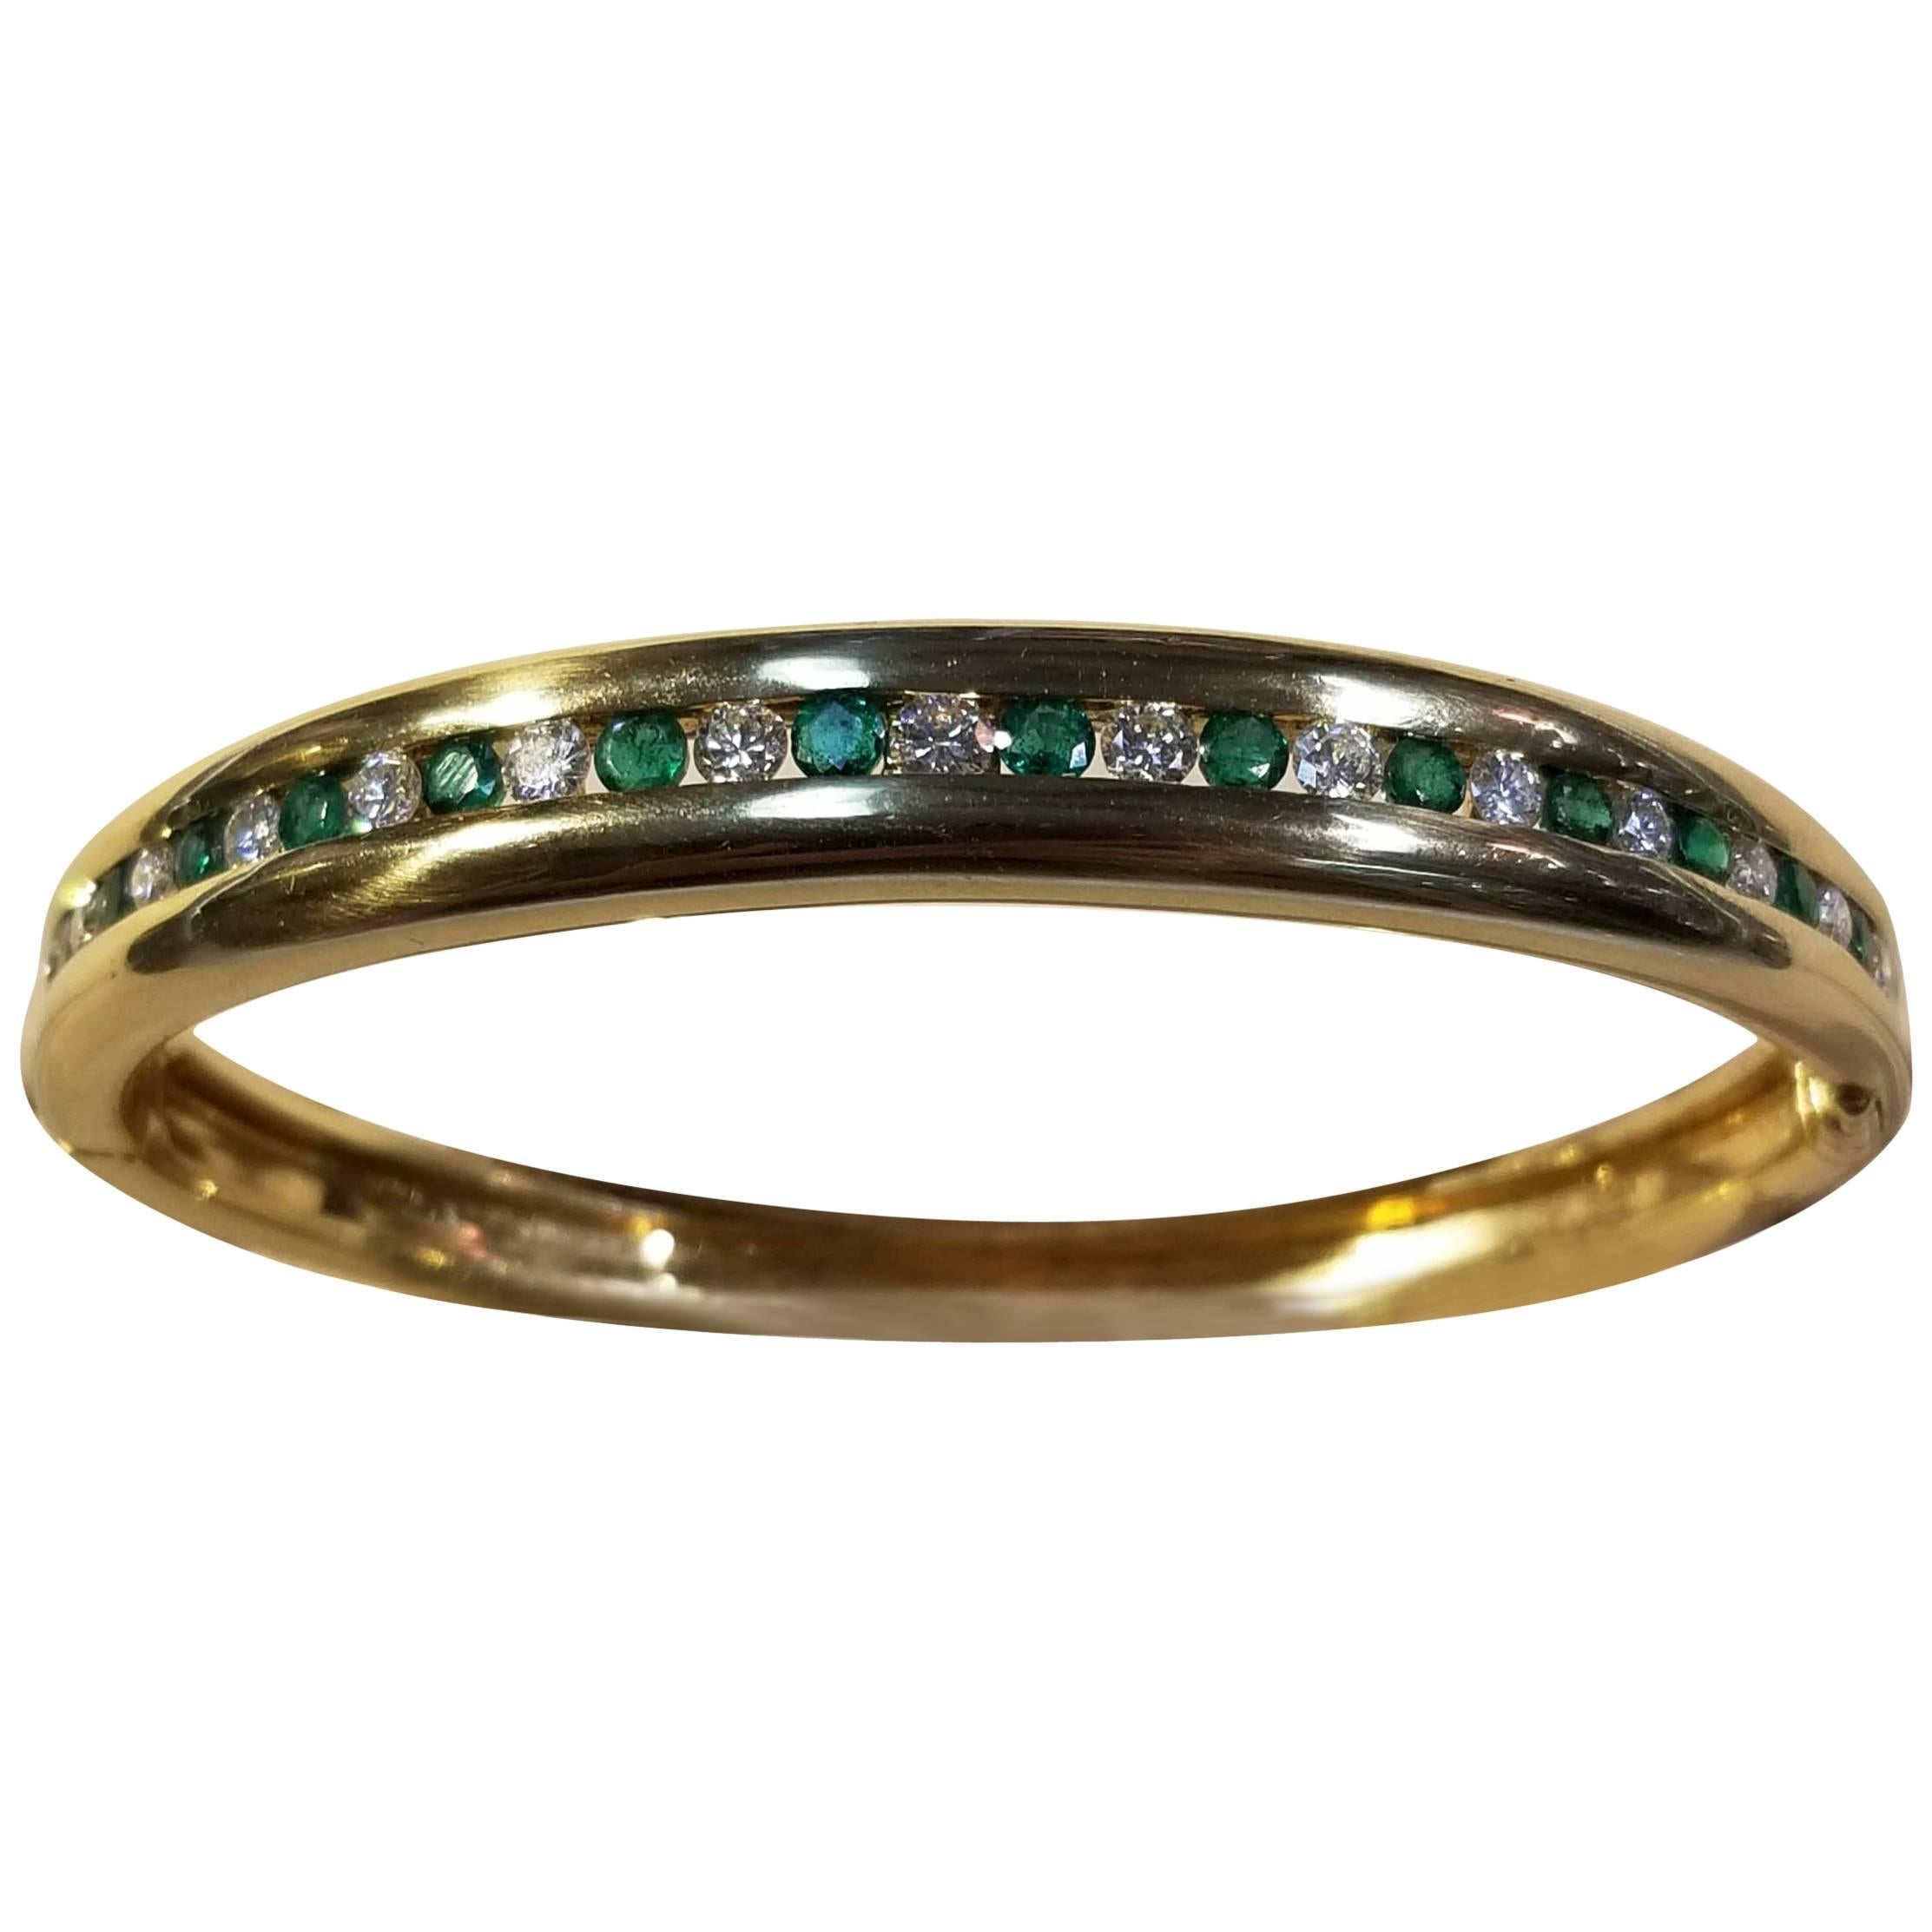 Bailey Banks and Biddle 18 Karat Yellow Gold Emerald and Diamond Bracelet For Sale